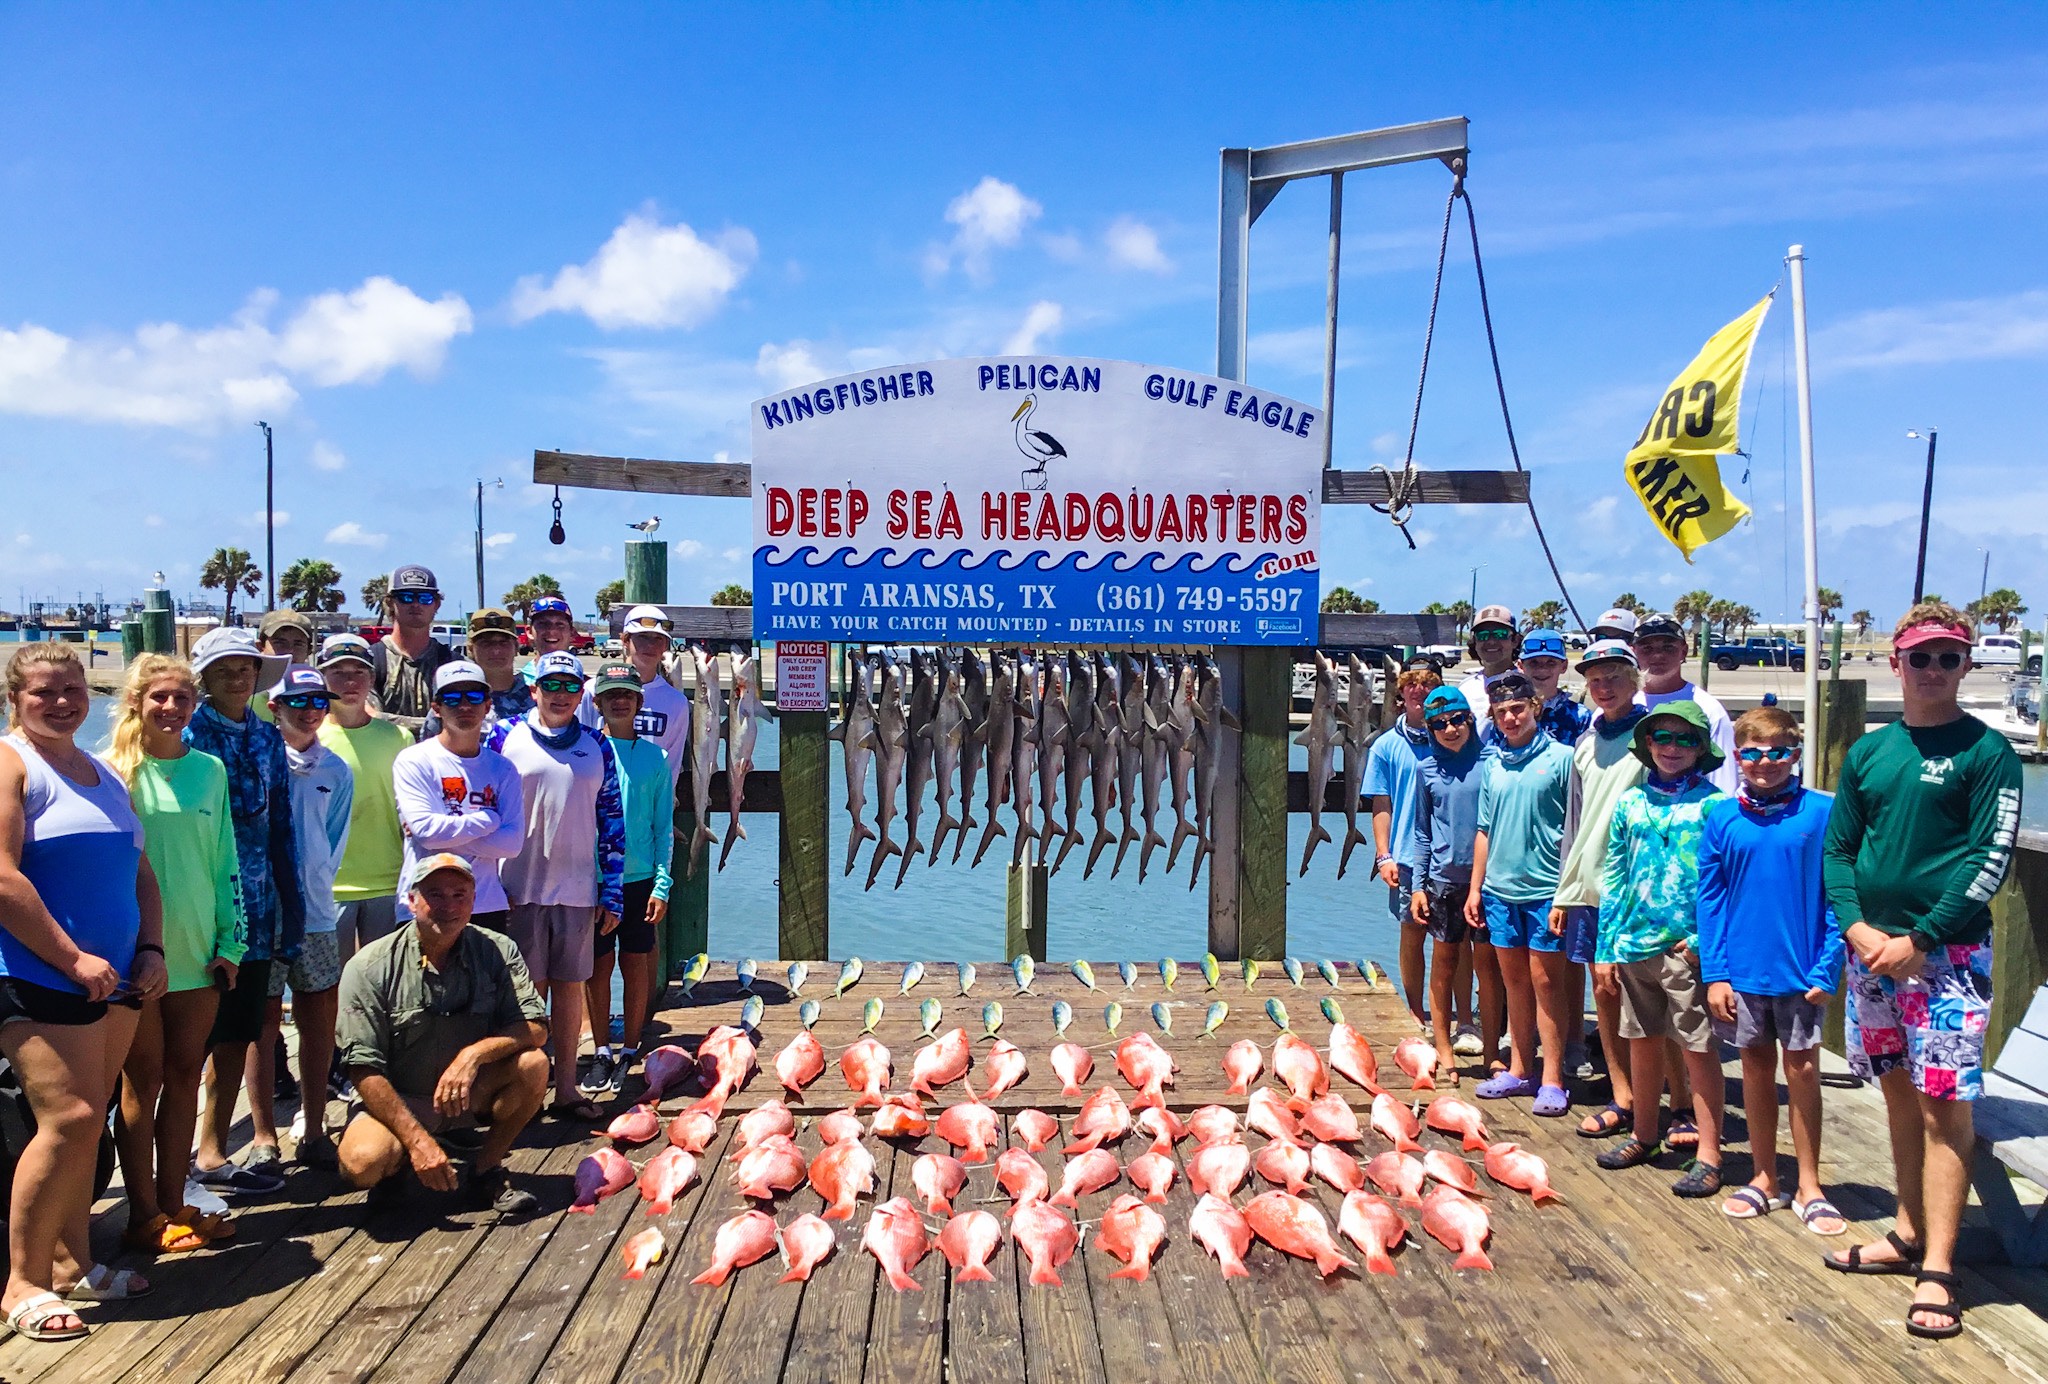 deep-sea-headquarters-kids-trip-texas-outdoor-camps group fishing charters port aransas private charters